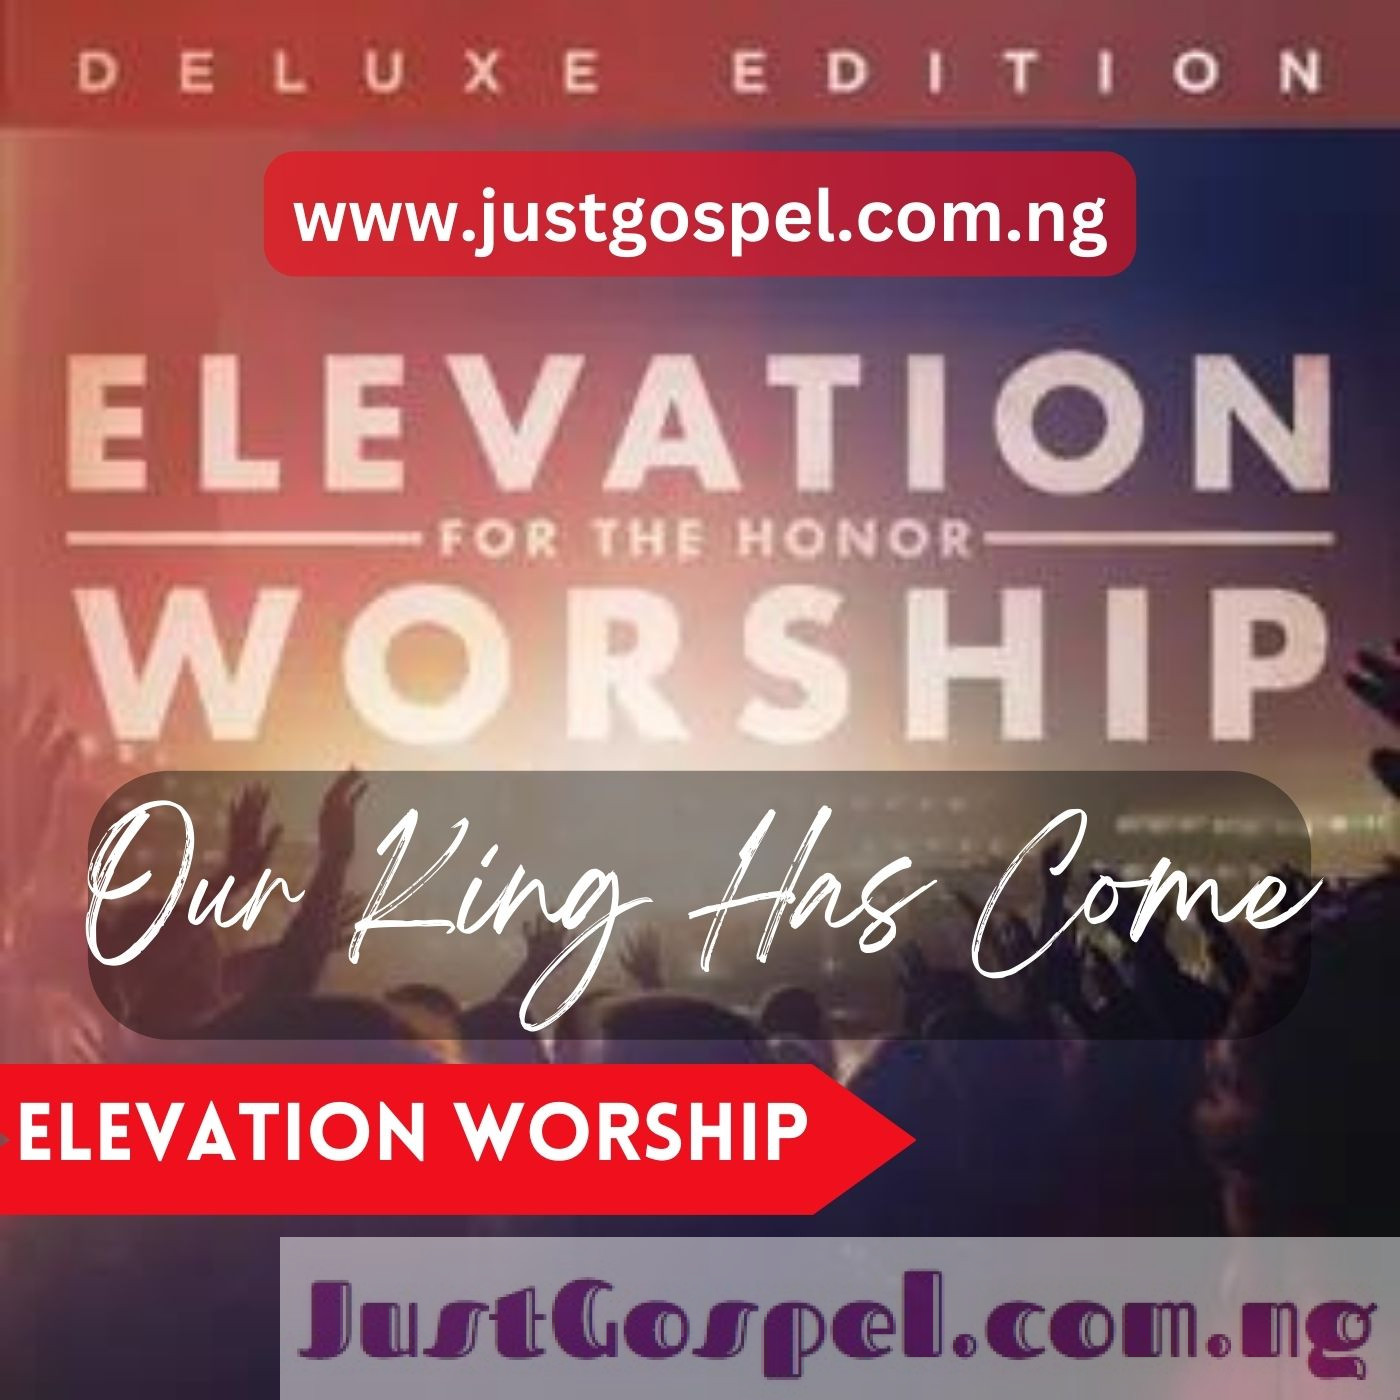 Elevation Worship – Our King Has Come Mp3 Download, Lyrics